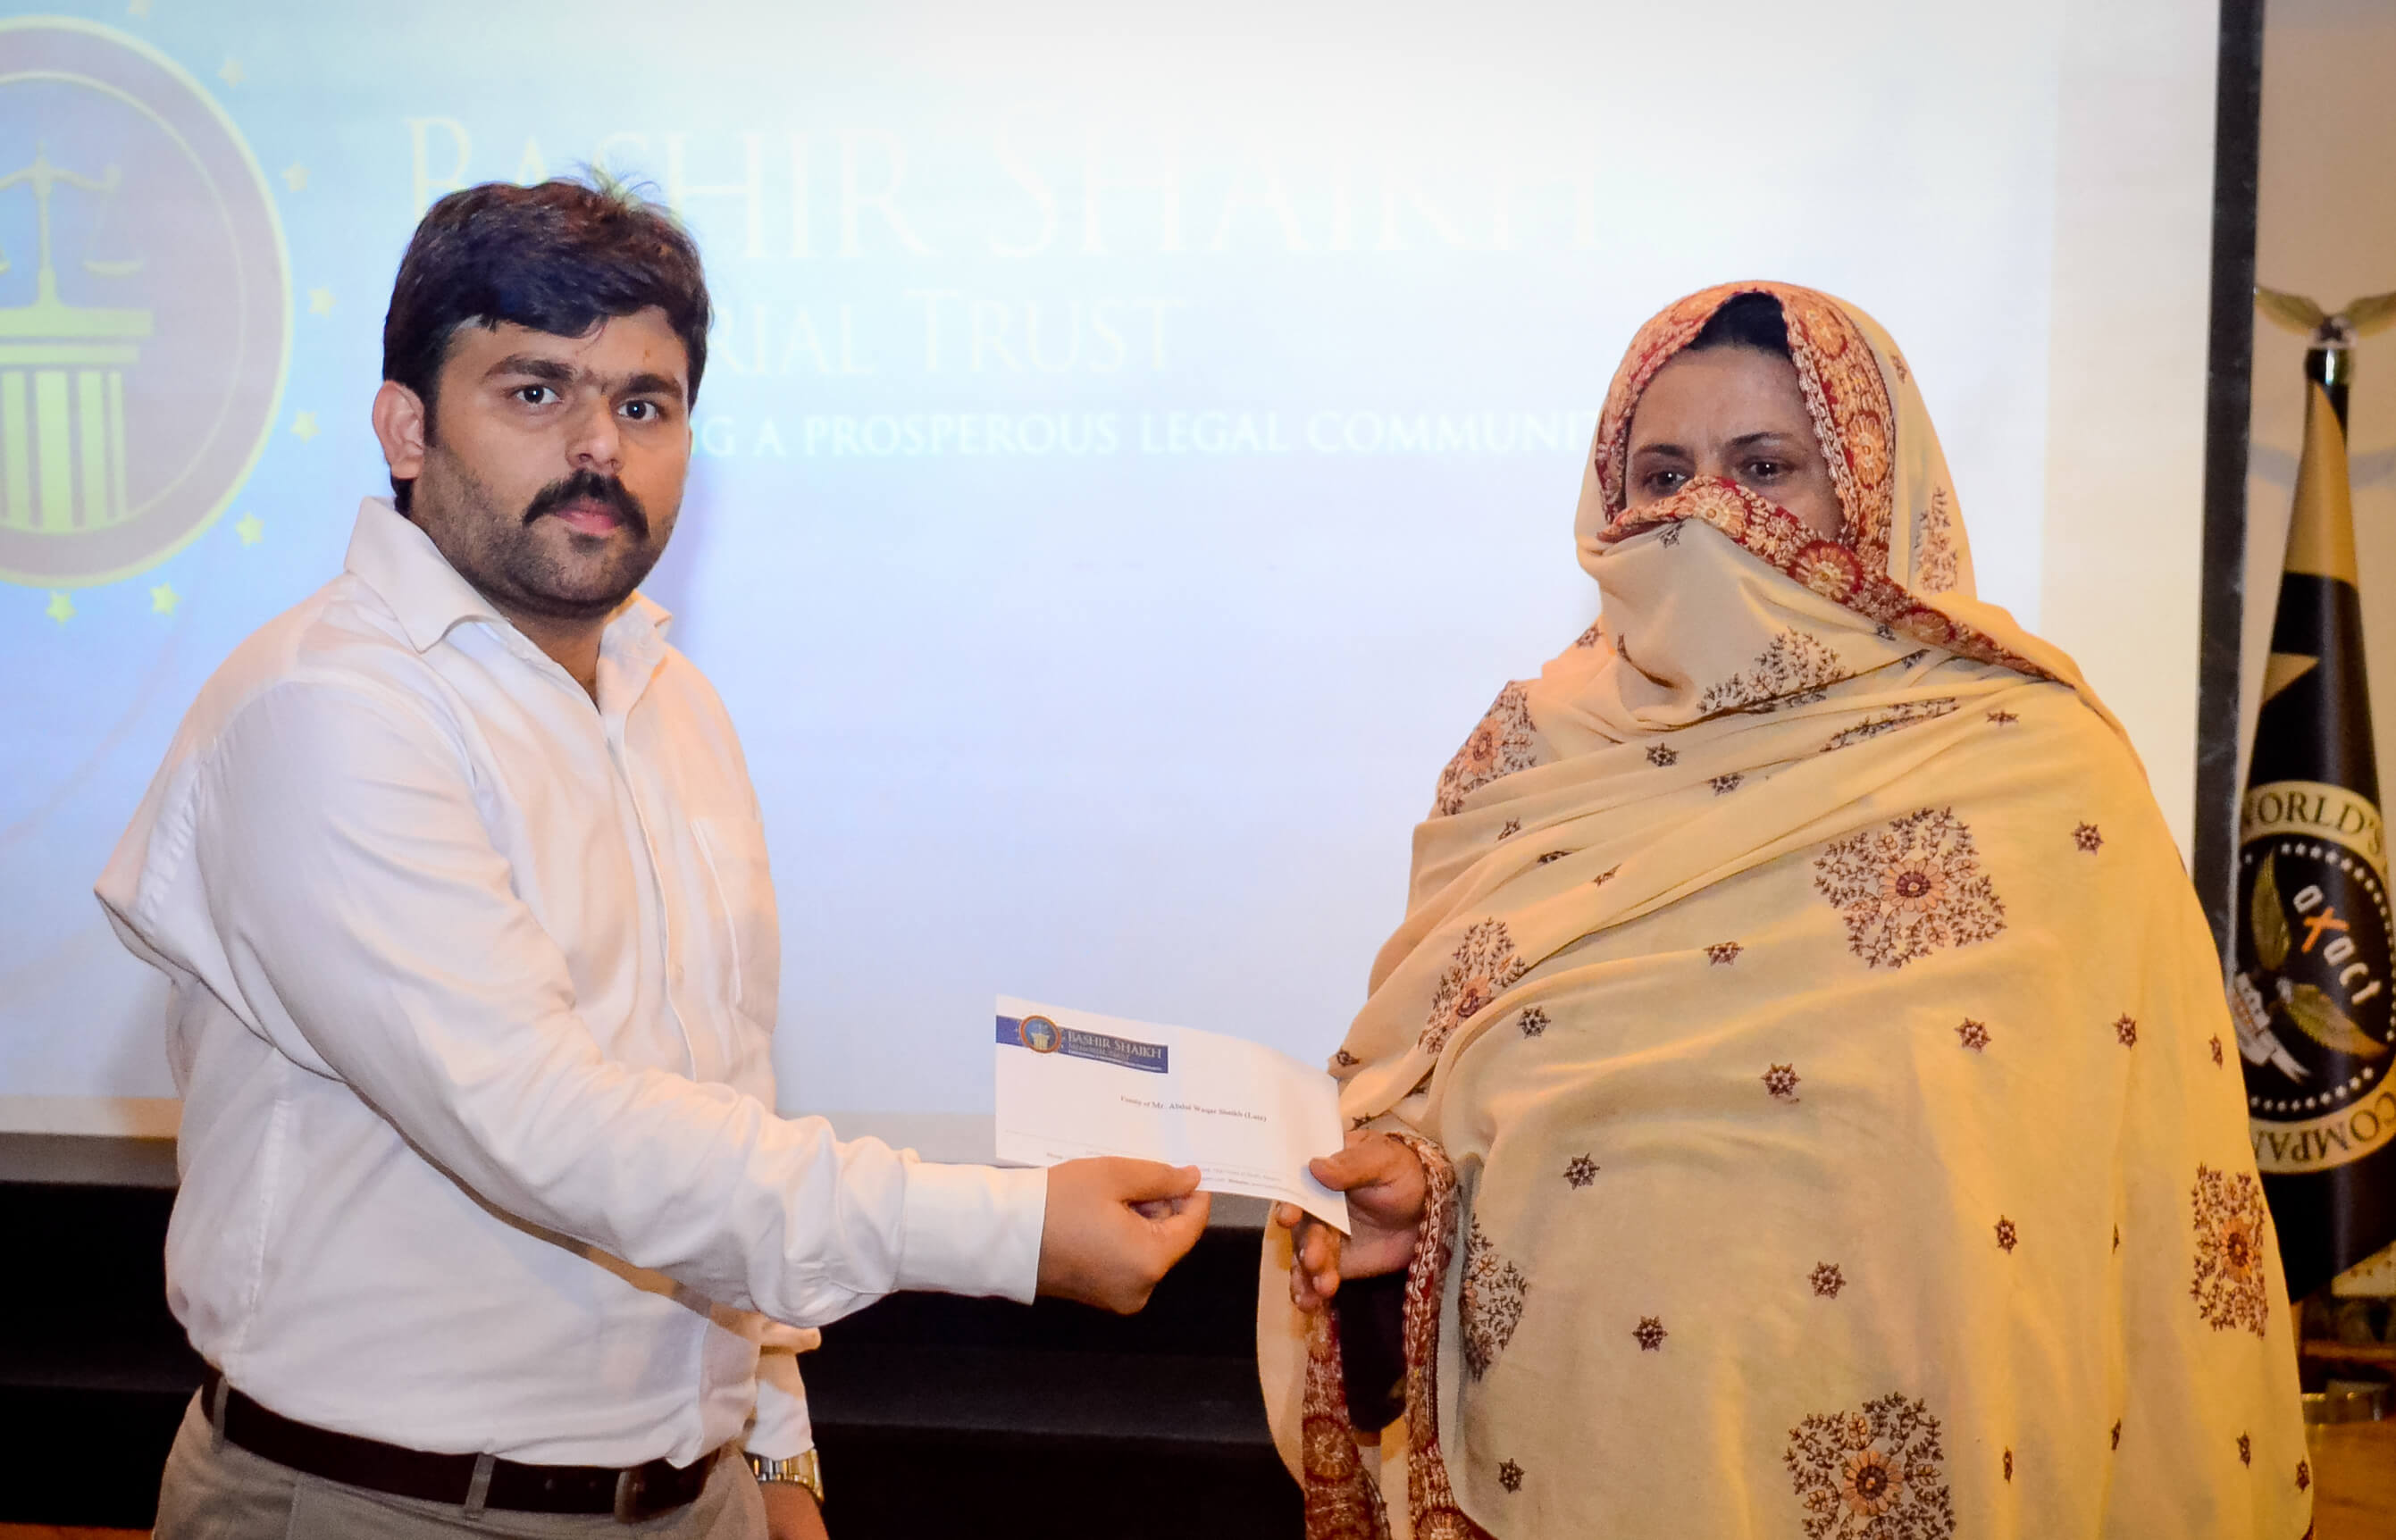 Mr. Imdad Ali Saheto, Secretary, BSMT, presenting a cheque to the family member of the deceased member.